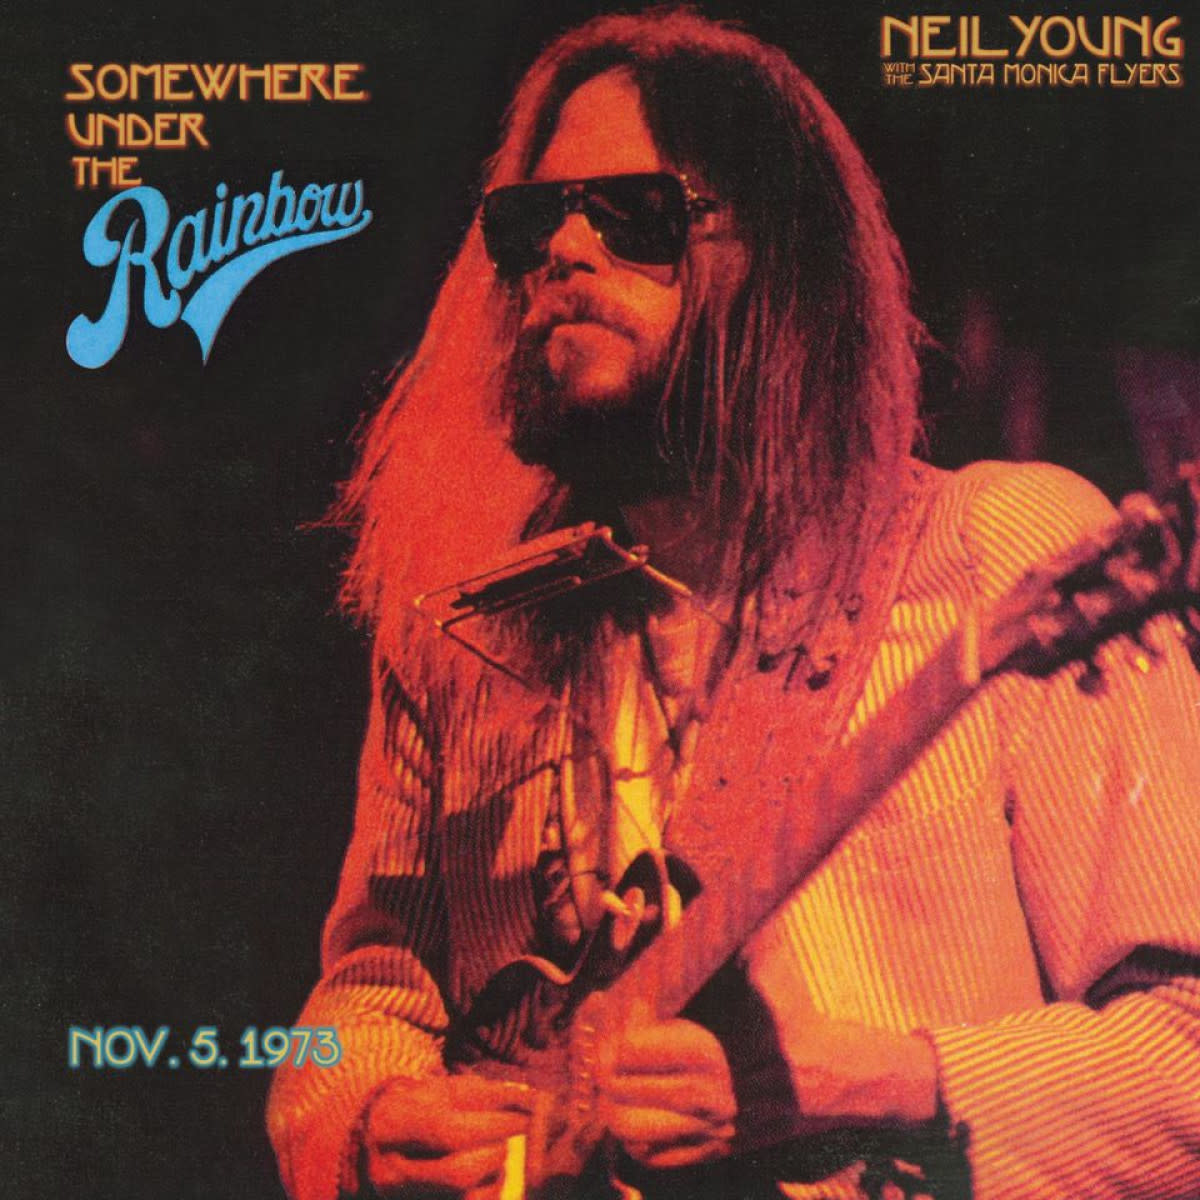 Neil Young With The Santa Monica Flyers – Somewhere Under The Rainbow